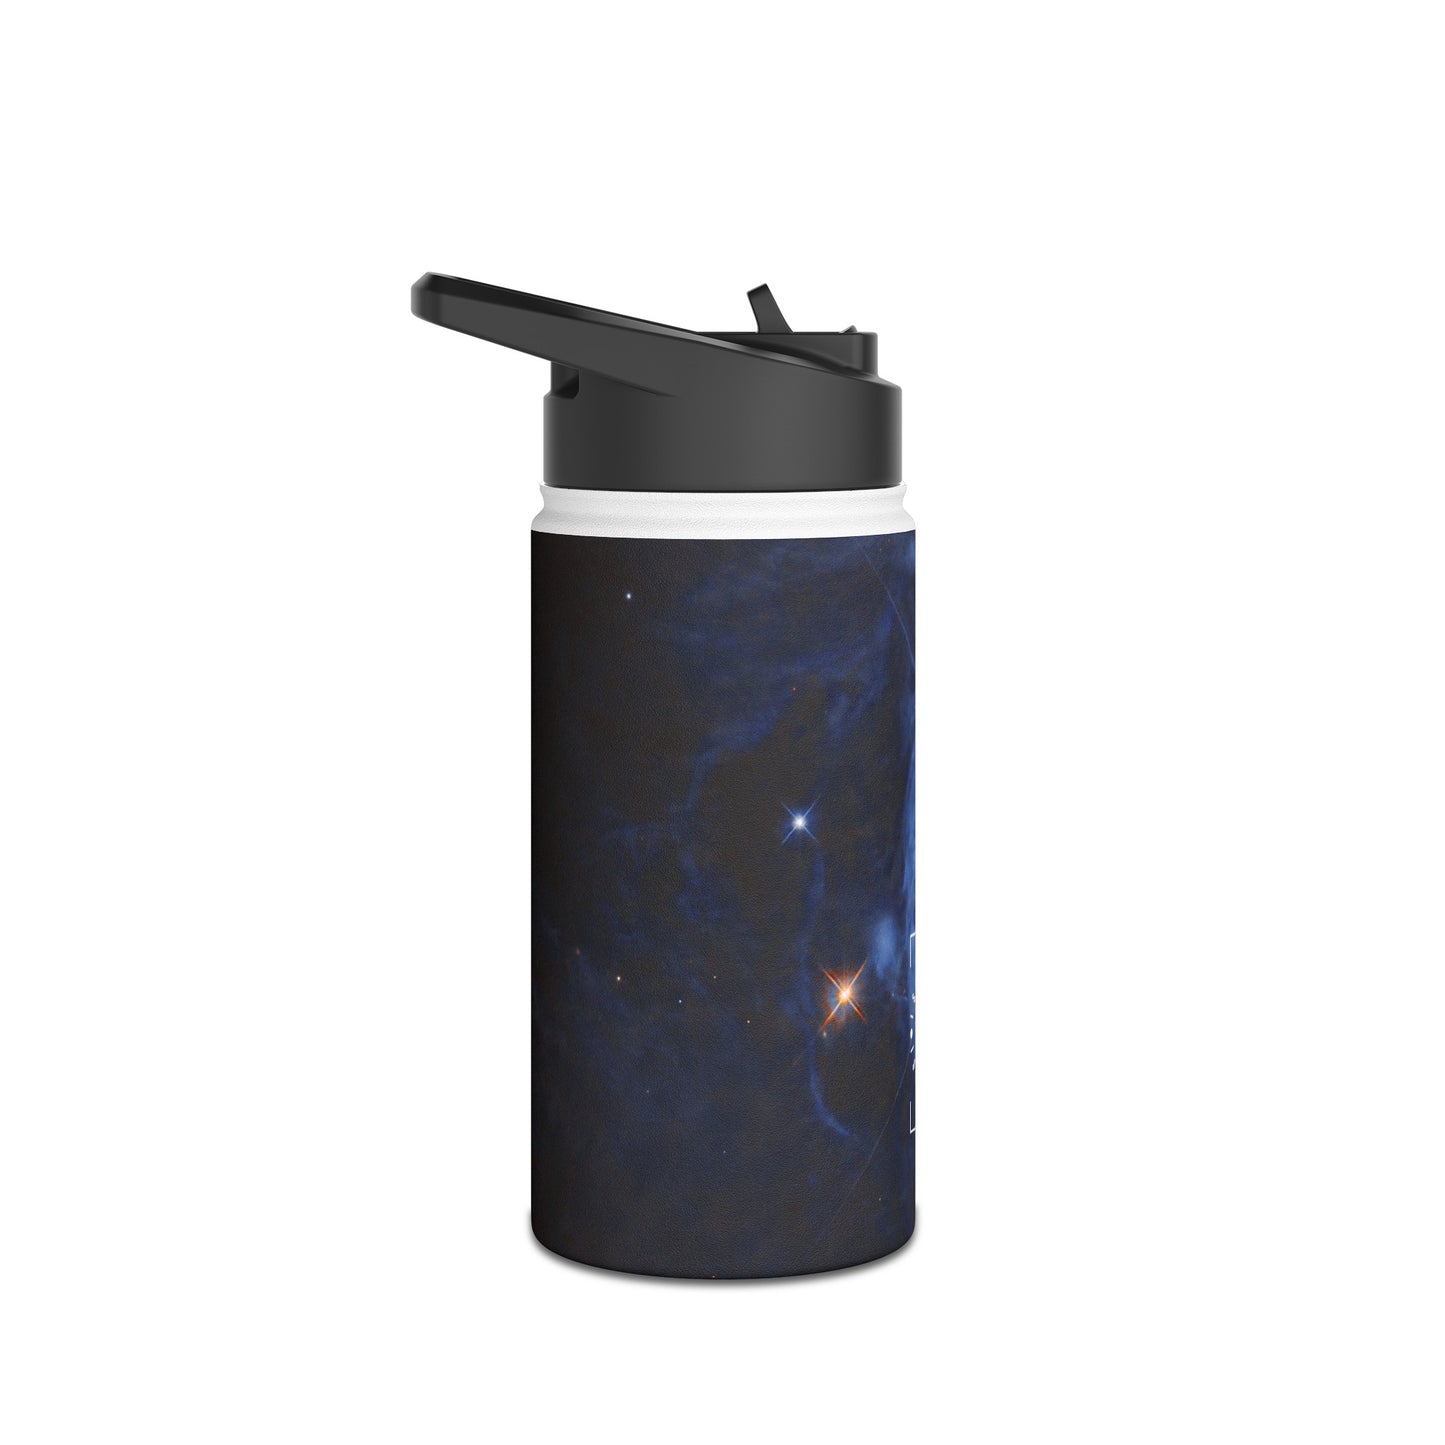 HP Tau, HP Tau G2, and G3 3 star system captured by Hubble - Water Bottle